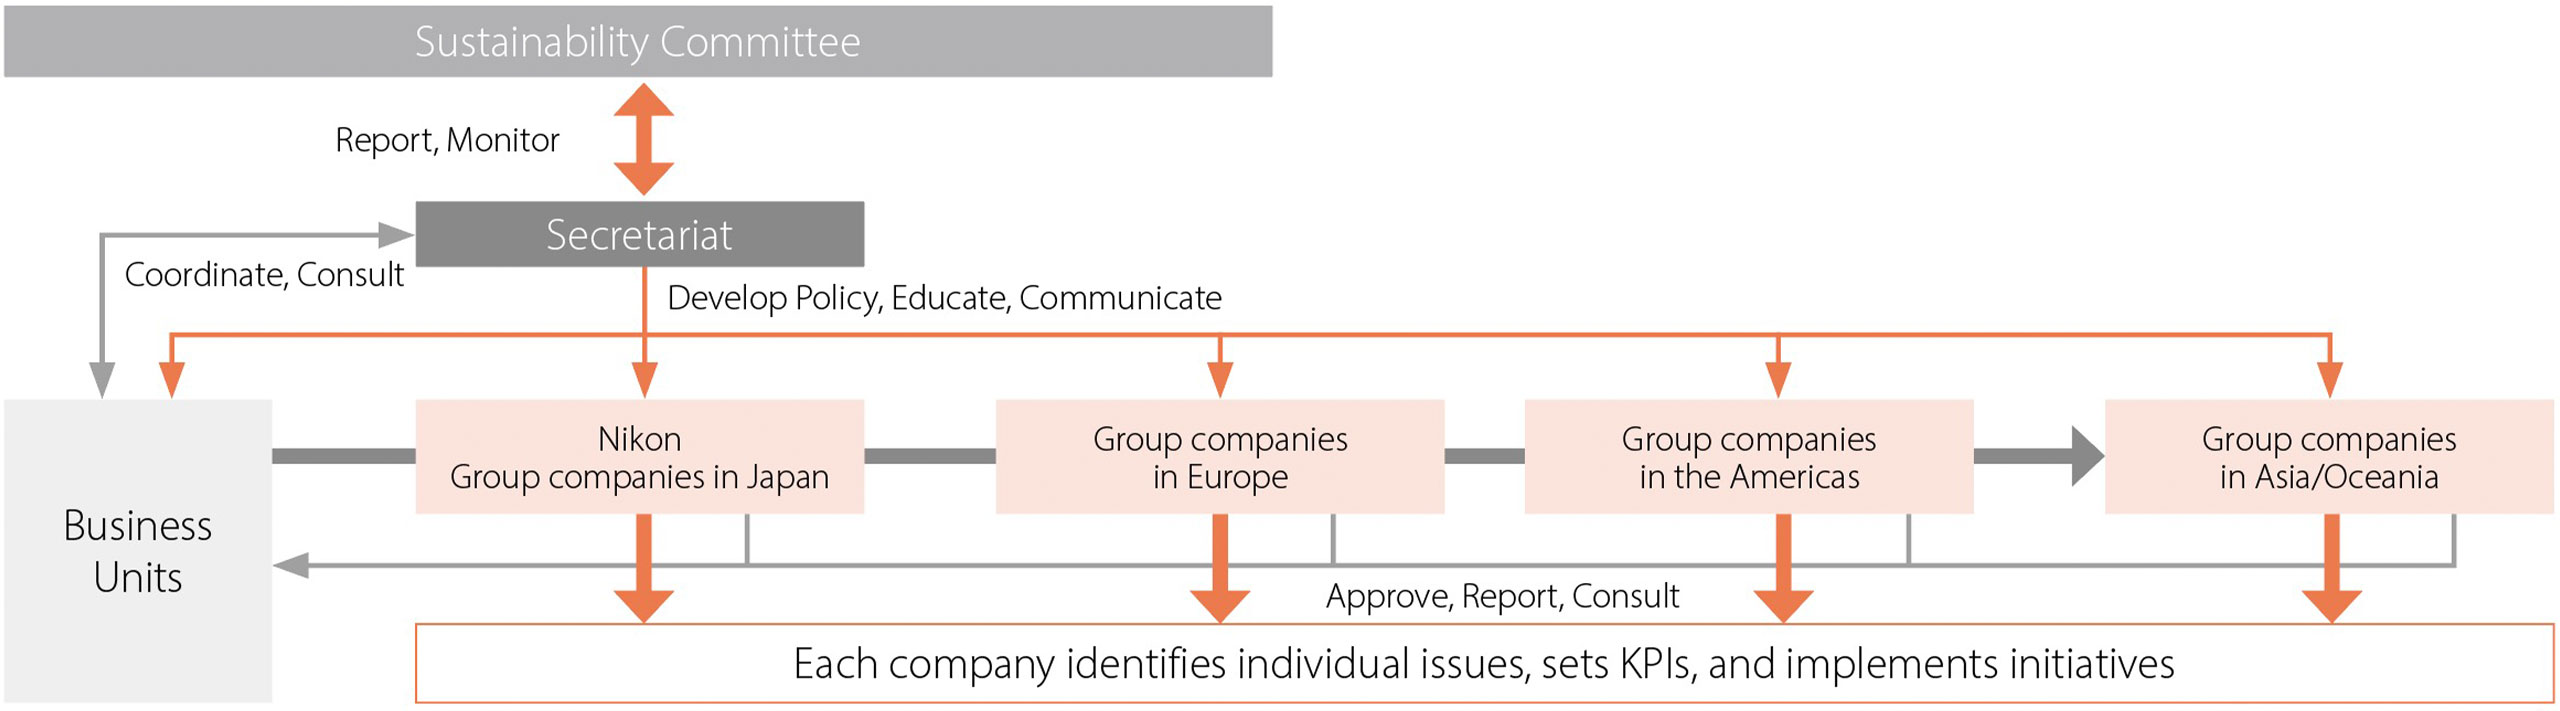 Sustainability Committee / Report, Monitor / Secretariat / Coordinate, Consult / Develop Policy, Educate, Communicate / Business Units / Nikon Group companies in Japan / Group companies in Europe / Group companies in the Americas / Group companies in Asia/Oceania / Approve, Report, Consult / Each company identifies individual issues, sets KPIs, and implements initiatives